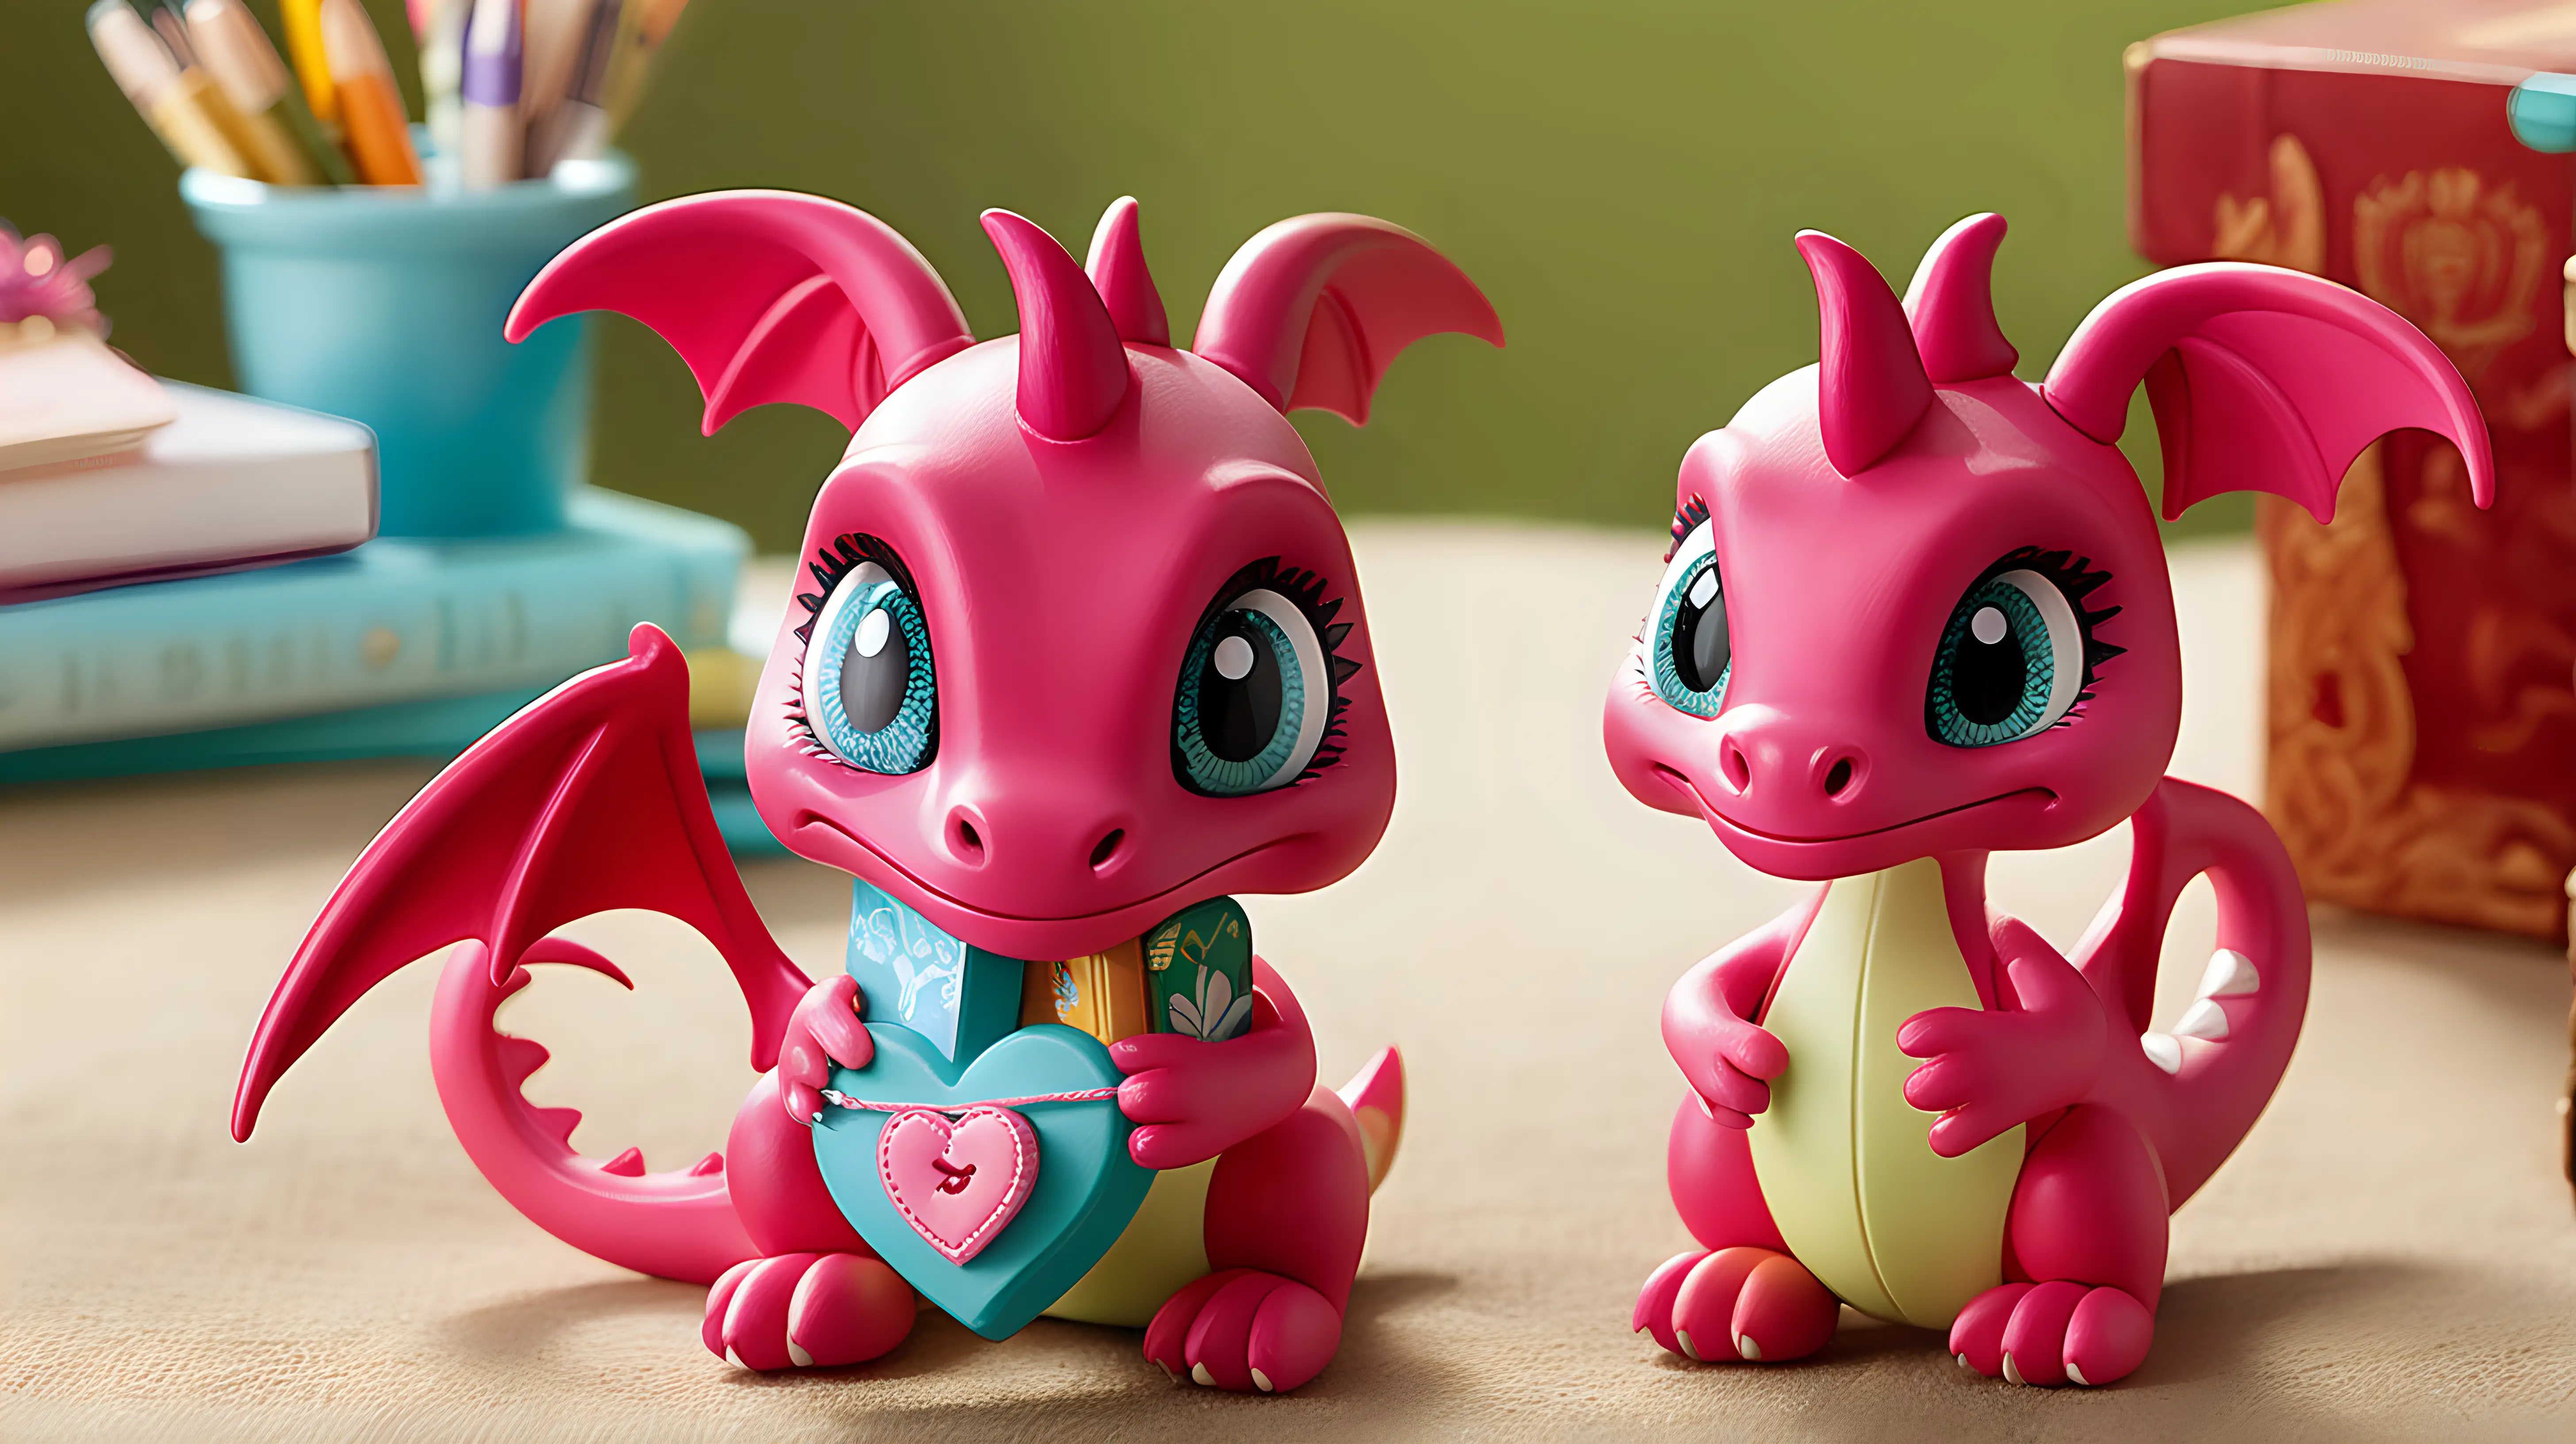 "Craft an endearing cartoon character that is a miniature, pocket-sized dragon with a love for collecting and sharing small trinkets, making it an instant favorite among viewers."